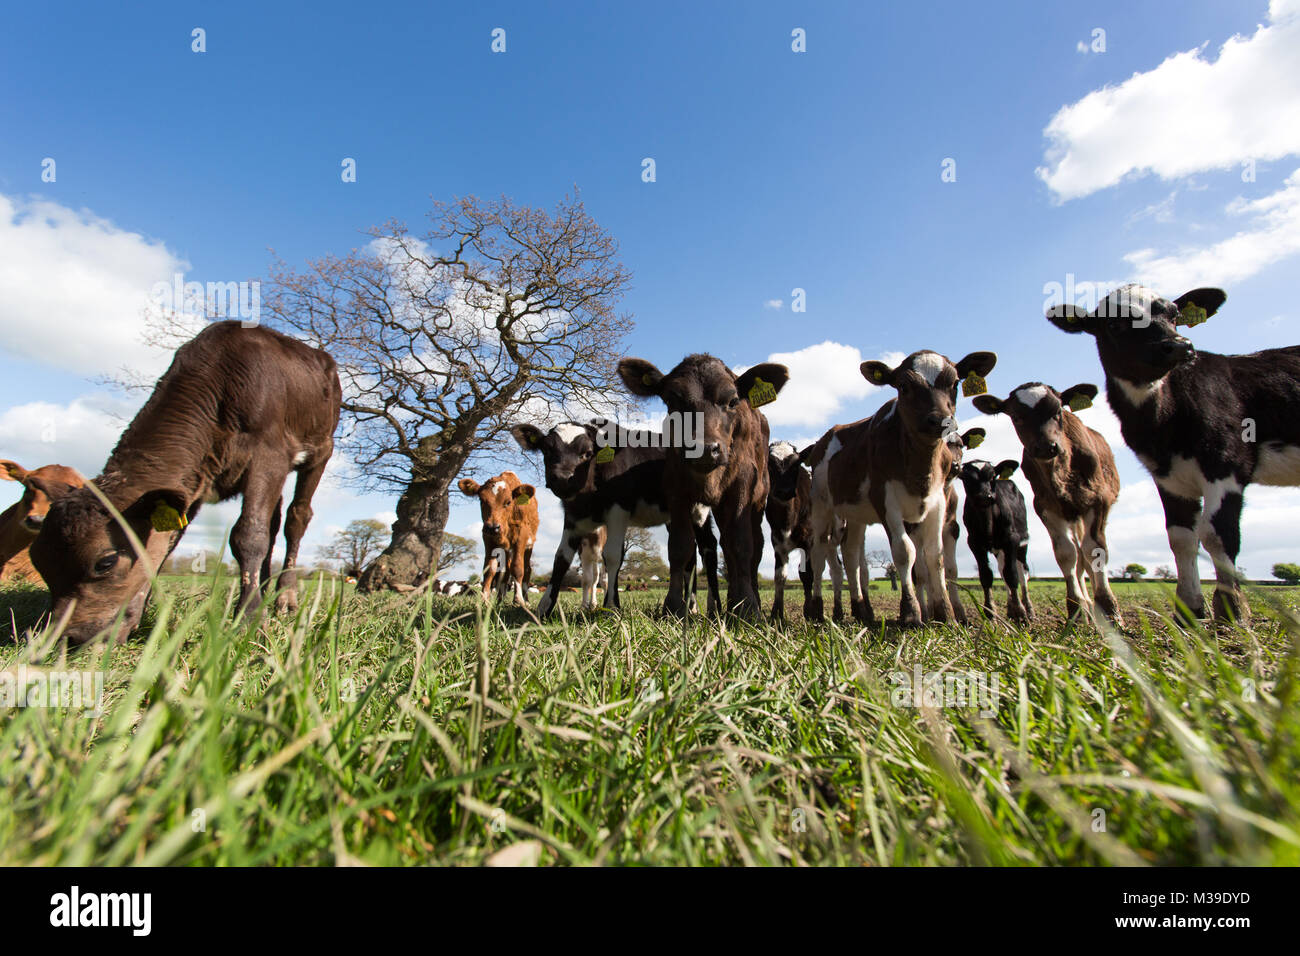 Village of Handley, England. Picturesque spring view of calves grazing in a field near the Cheshire village of Handley. Stock Photo